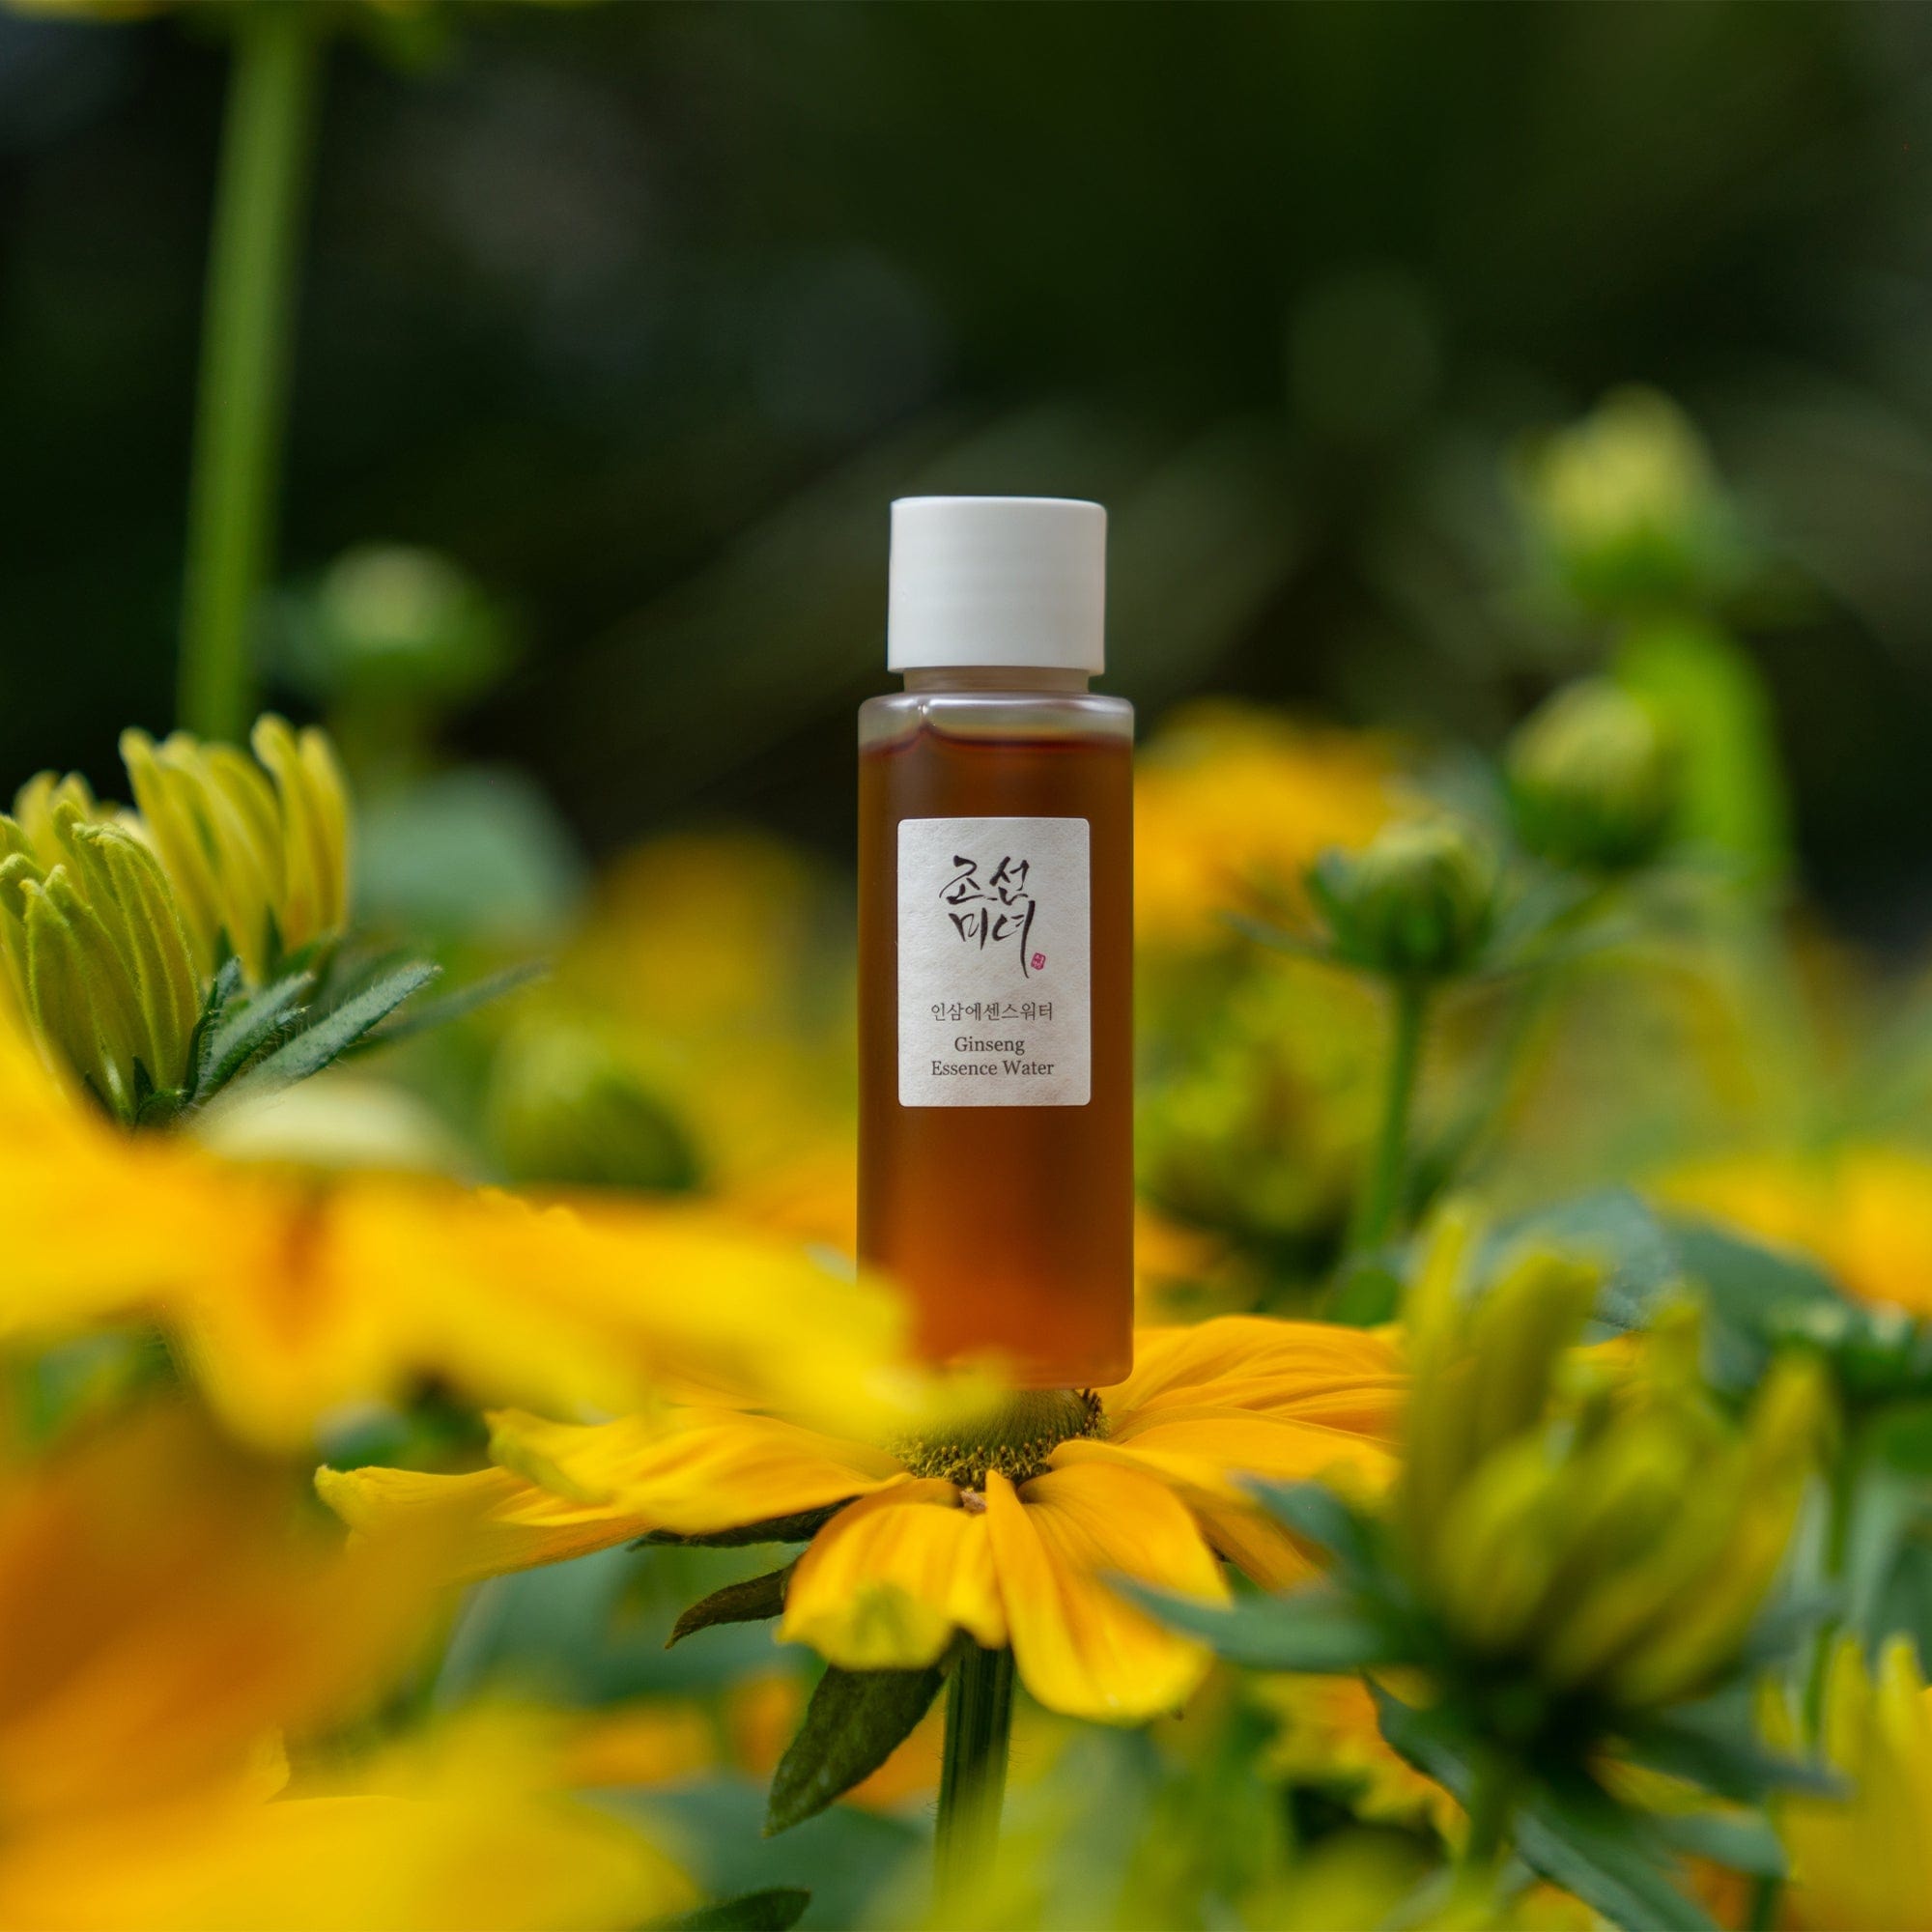 Photograph of Beauty of Joseon - Ginseng Essence Water mini in a bed of Yellow flowers